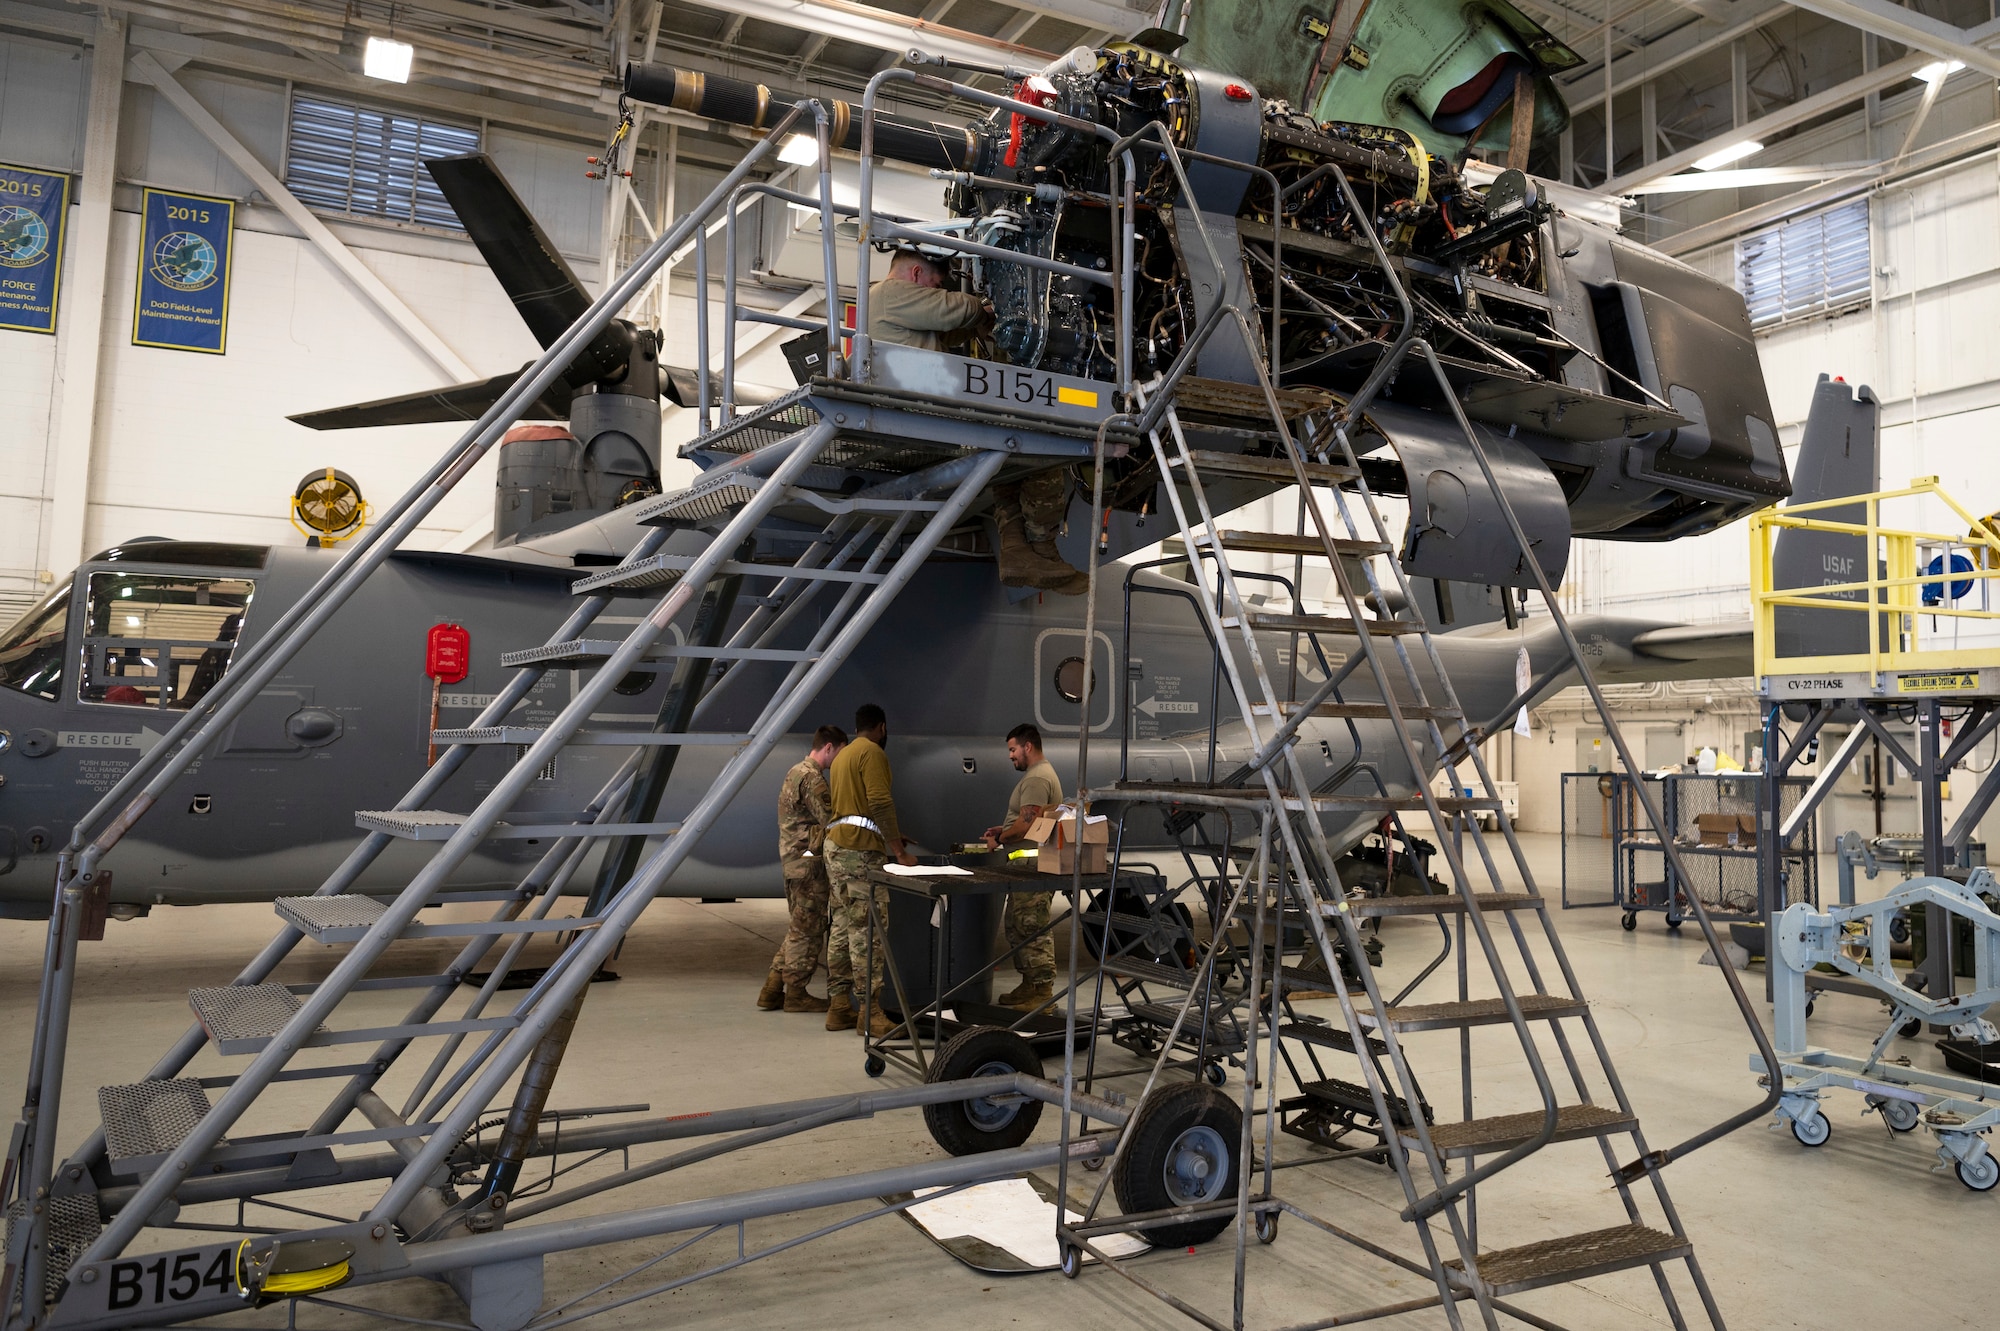 Airmen from the 801st Special Operations Aircraft Maintenance Squadron, work on a CV-22 Osprey during maintenance at Independence Hangar on Hurlburt Field, Fla., Feb15, 2022. The 801st SOAMXS's mission is to perform all equipment maintenance in support of worldwide special operations missions in response to national command authority taskings for the CV-22 Osprey supporting the 8th Special Operations Squadron.